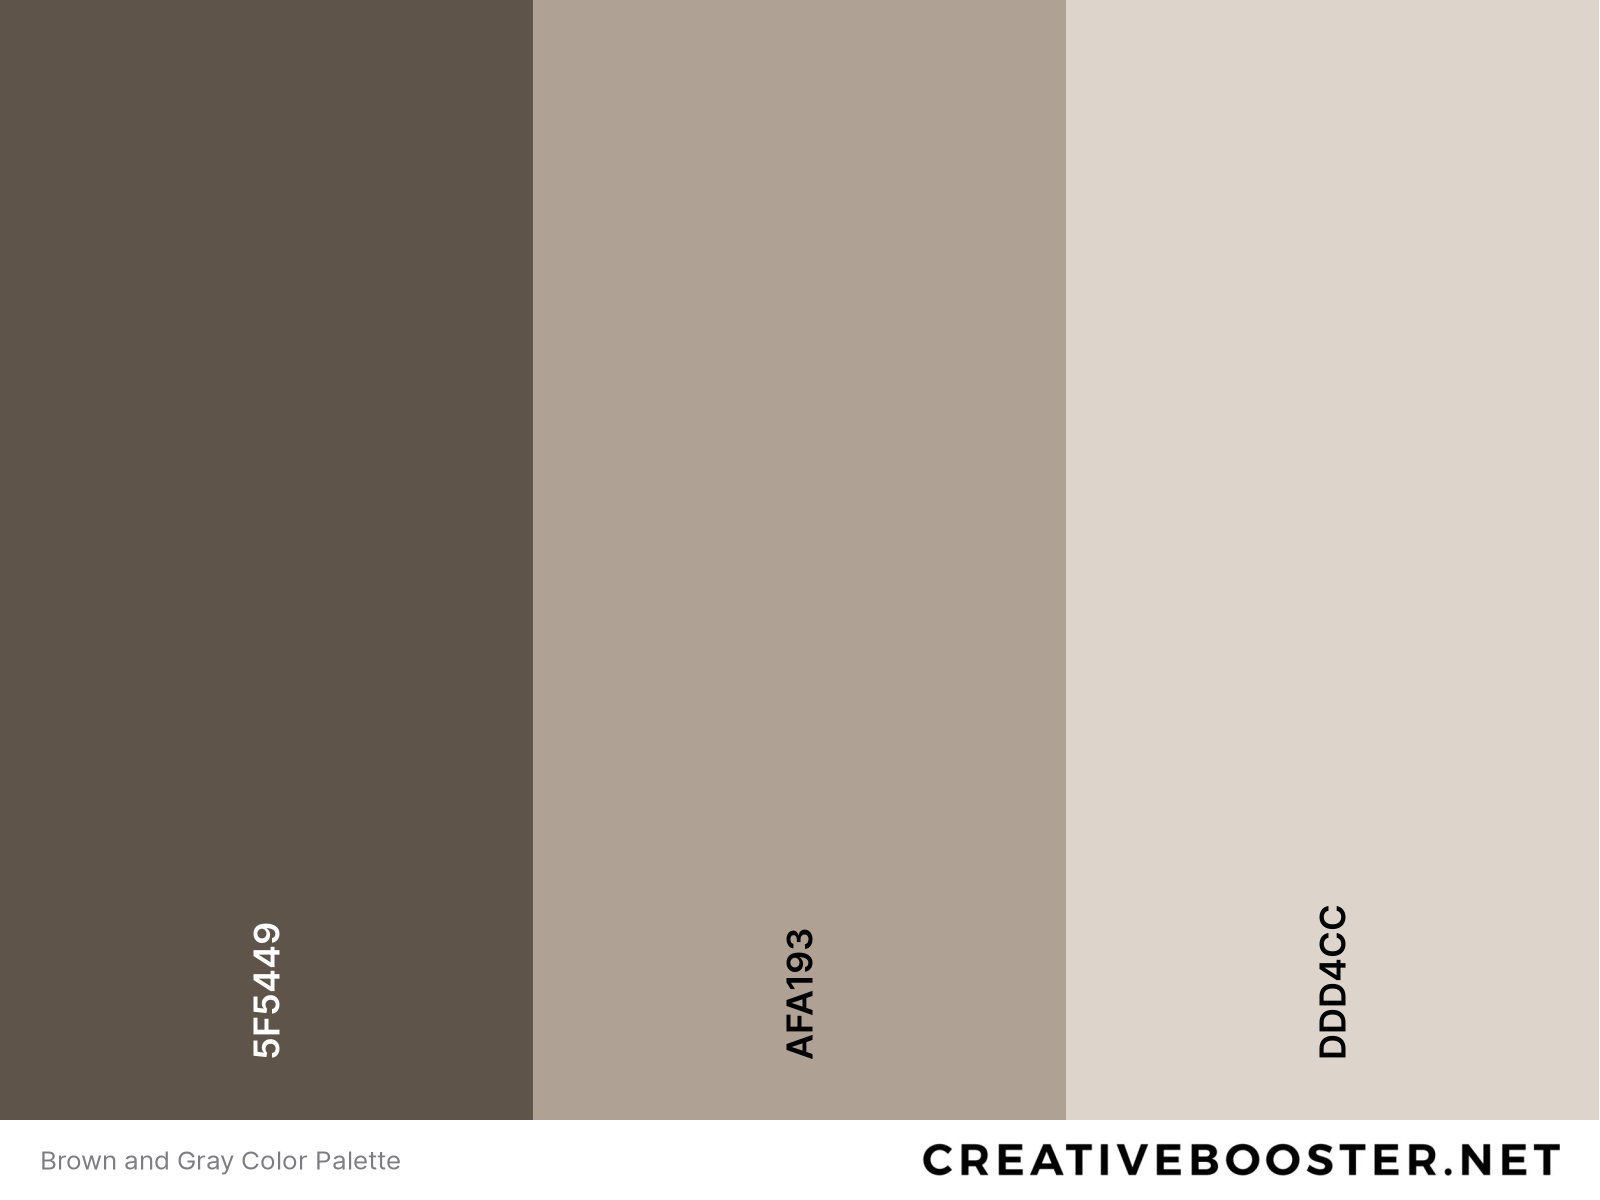 Brown and Gray Color Palette